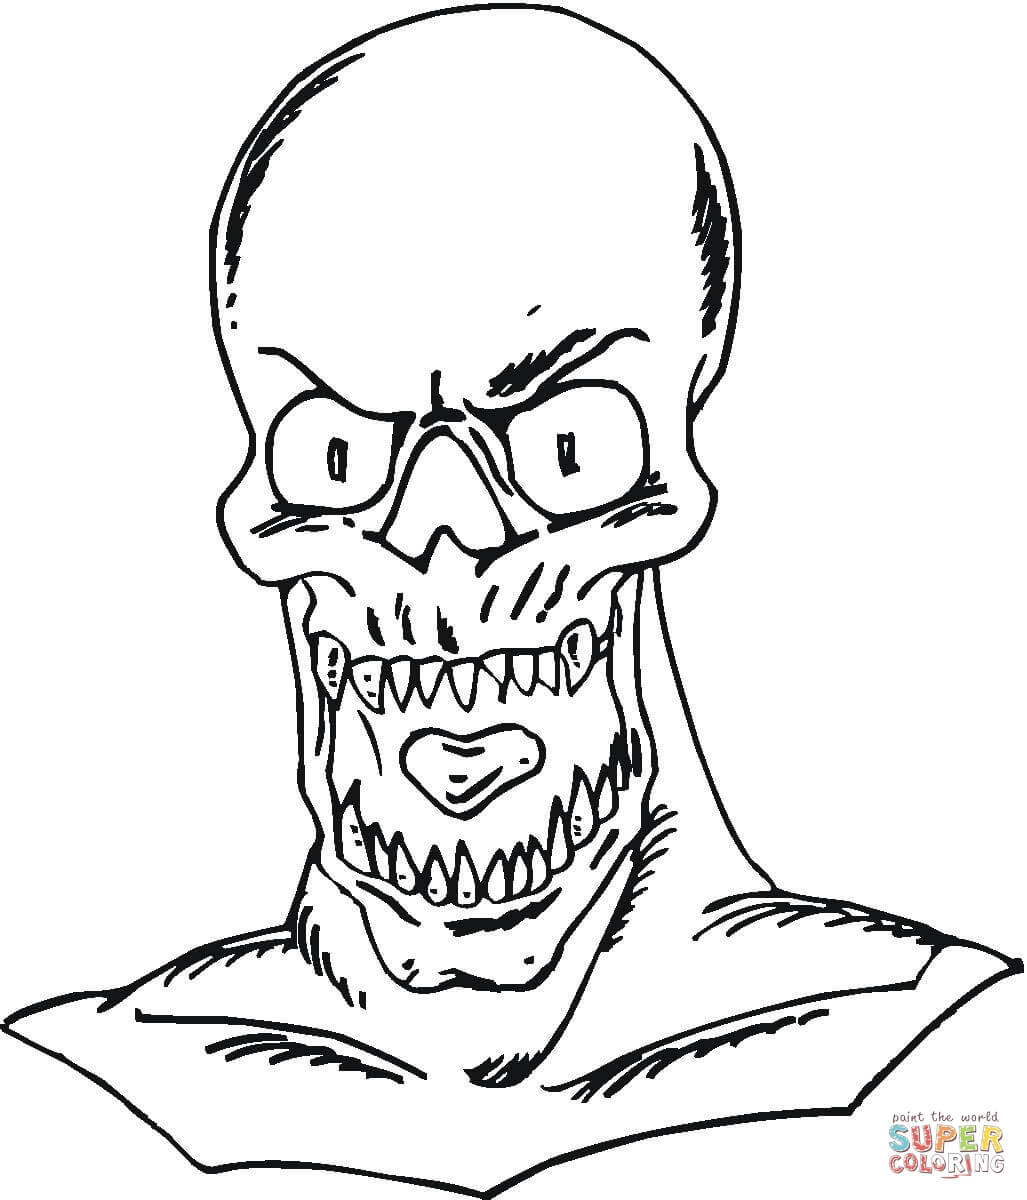 Undead coloring page | Free Printable Coloring Pages